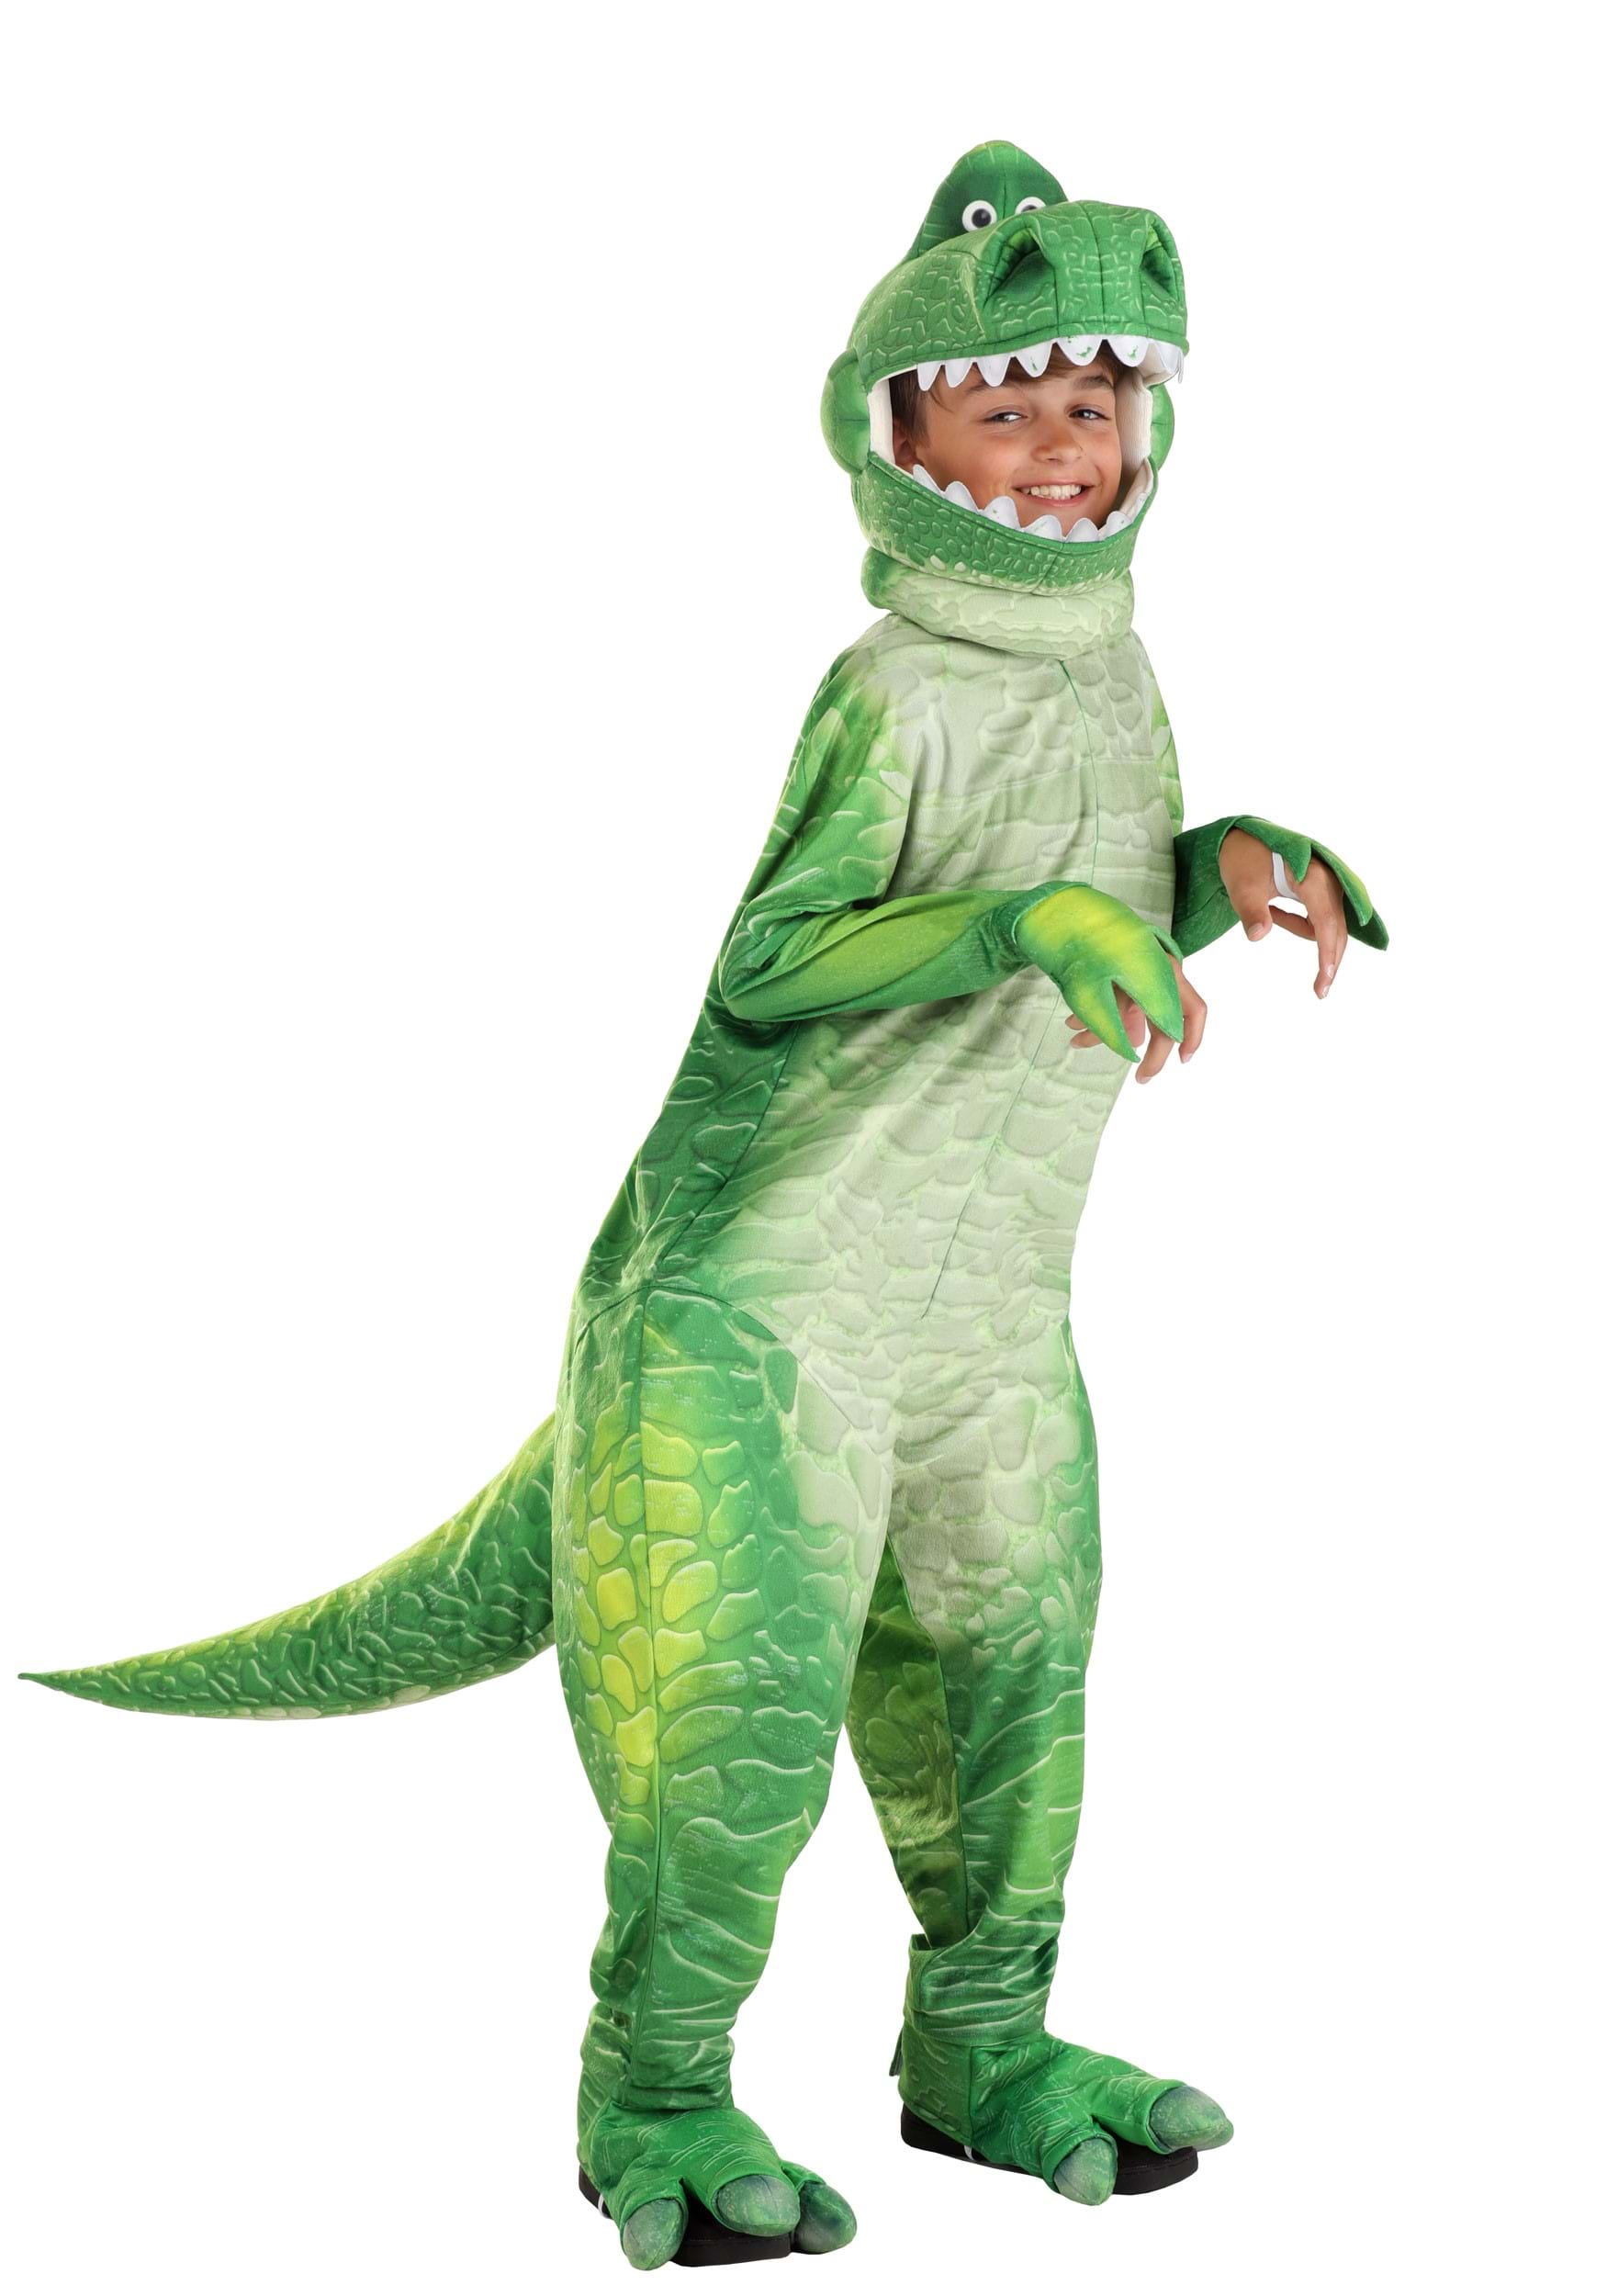 Photos - Fancy Dress Deluxe FUN Costumes Exclusive  Toy Story Rex Costume for Kids Green/Yel 